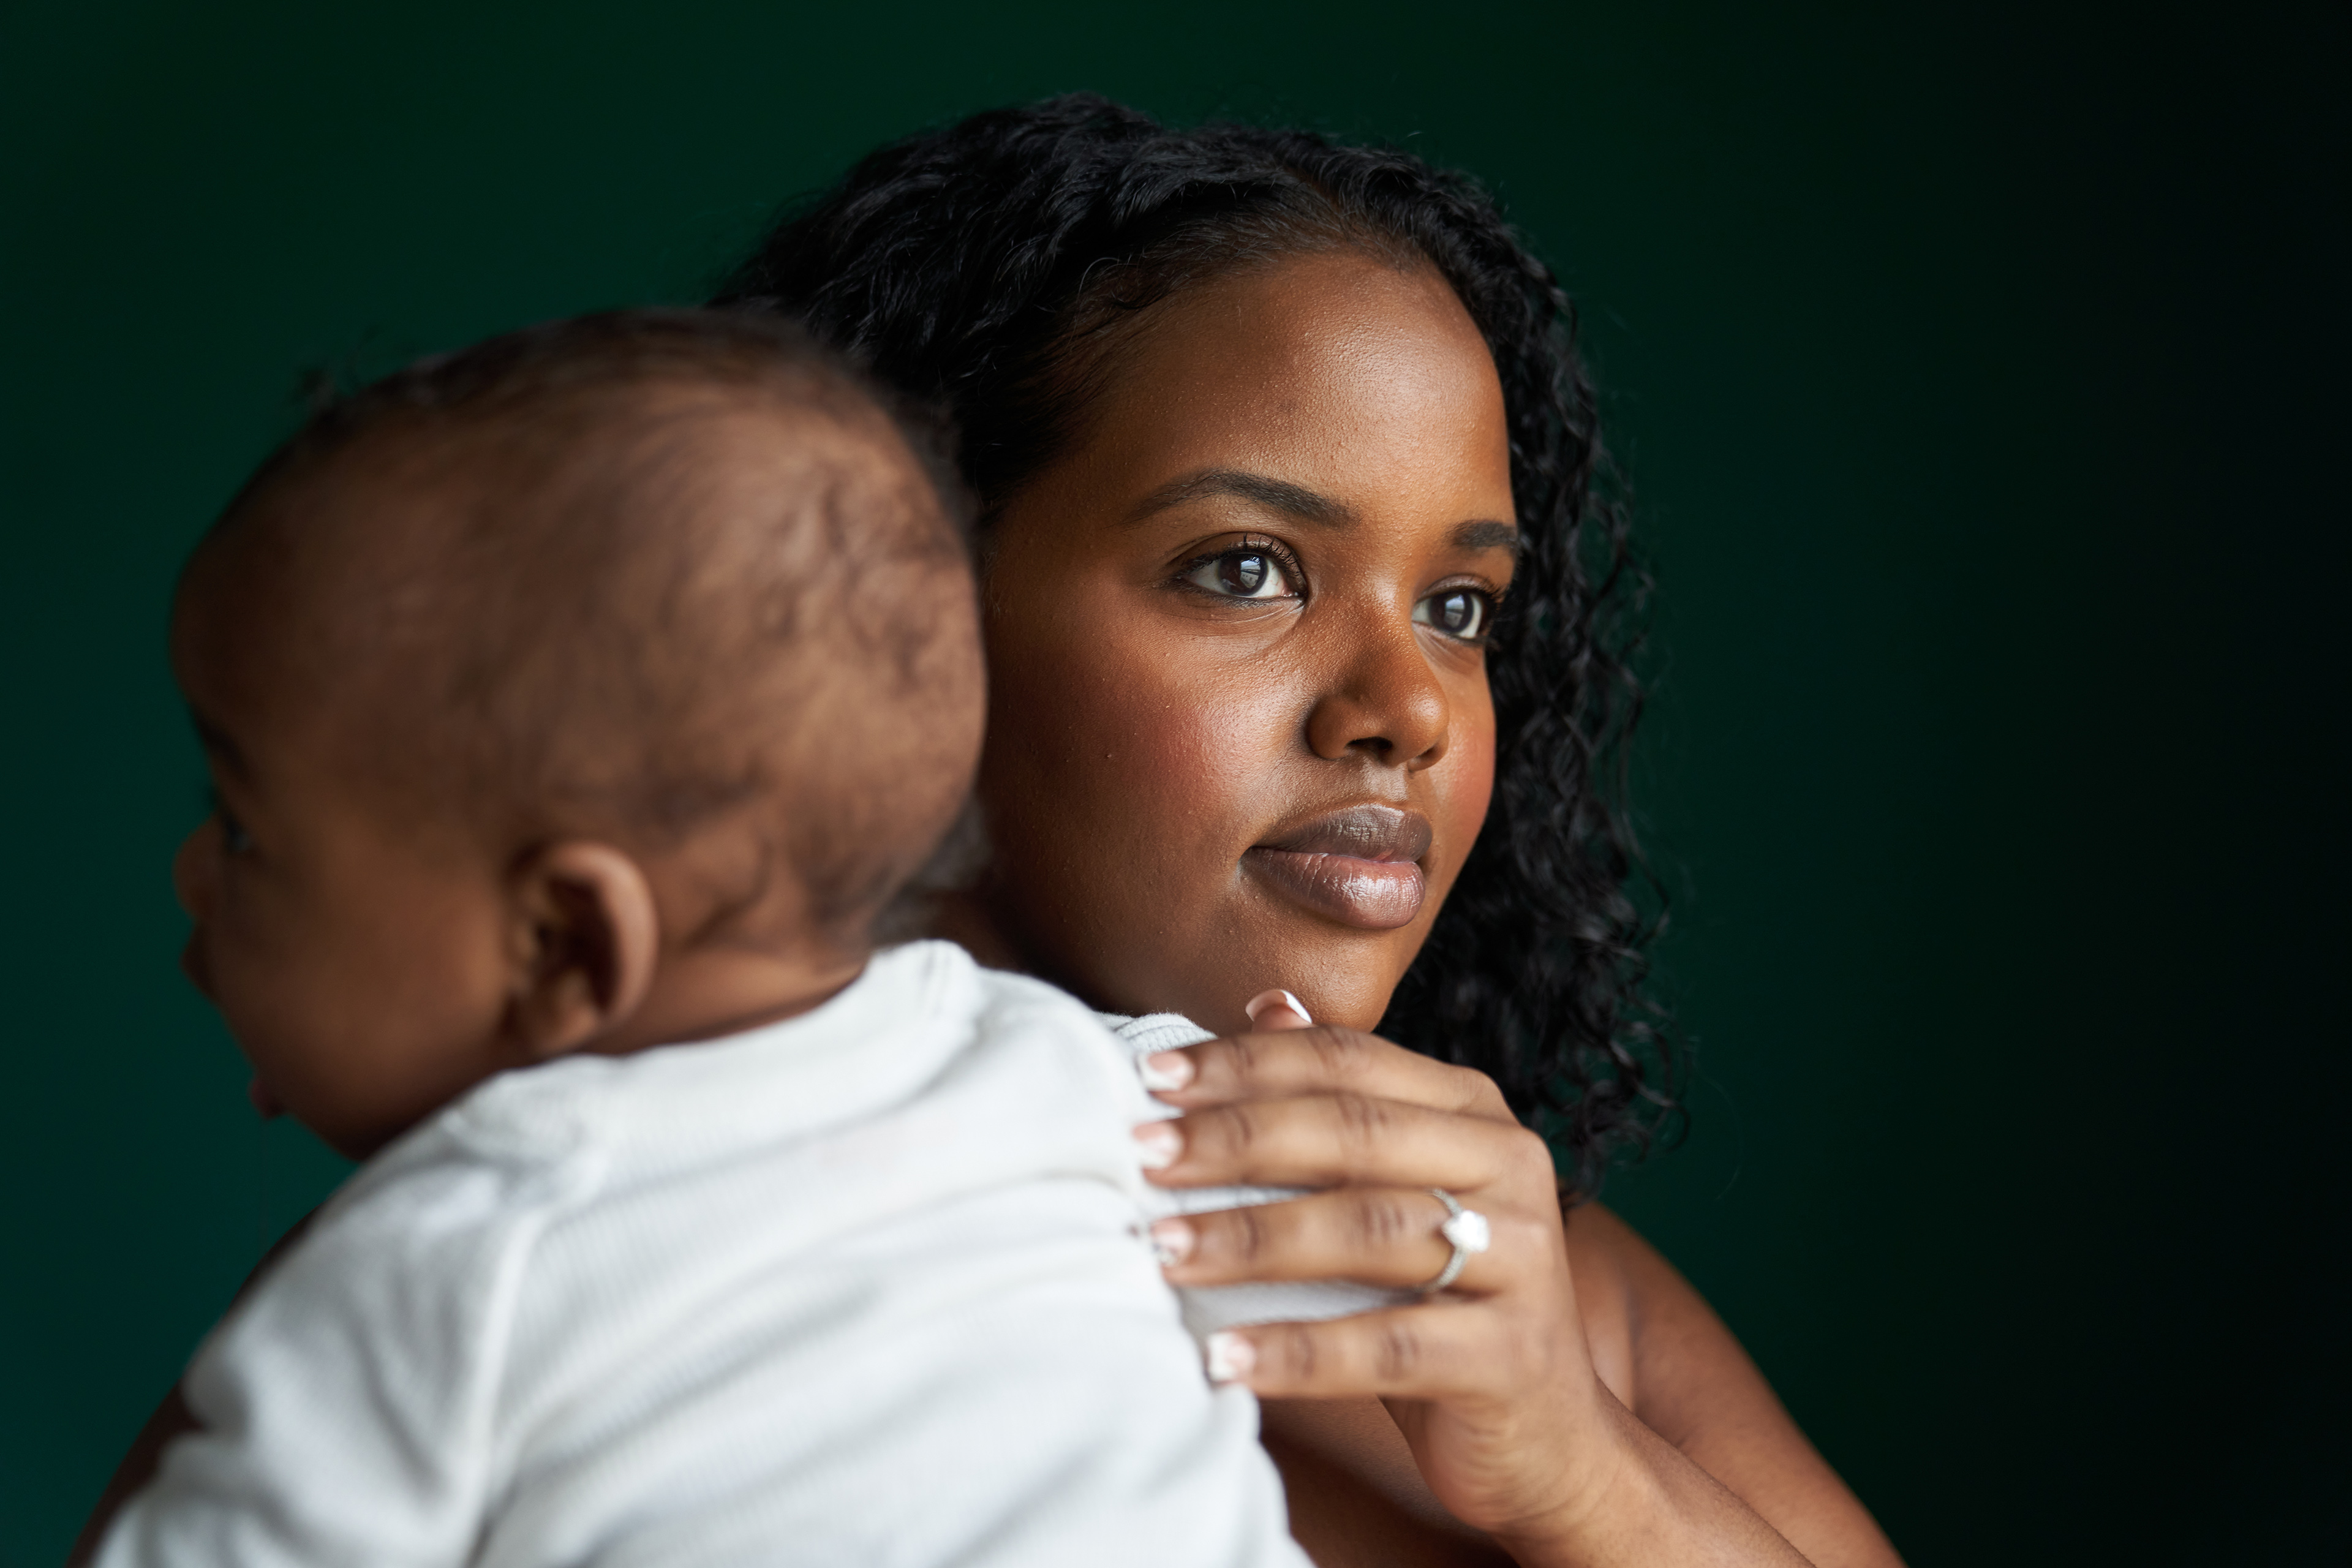 Mothers of Color Can’t See if Providers Have a History of Mistreatment. Why Not? – California Healthline